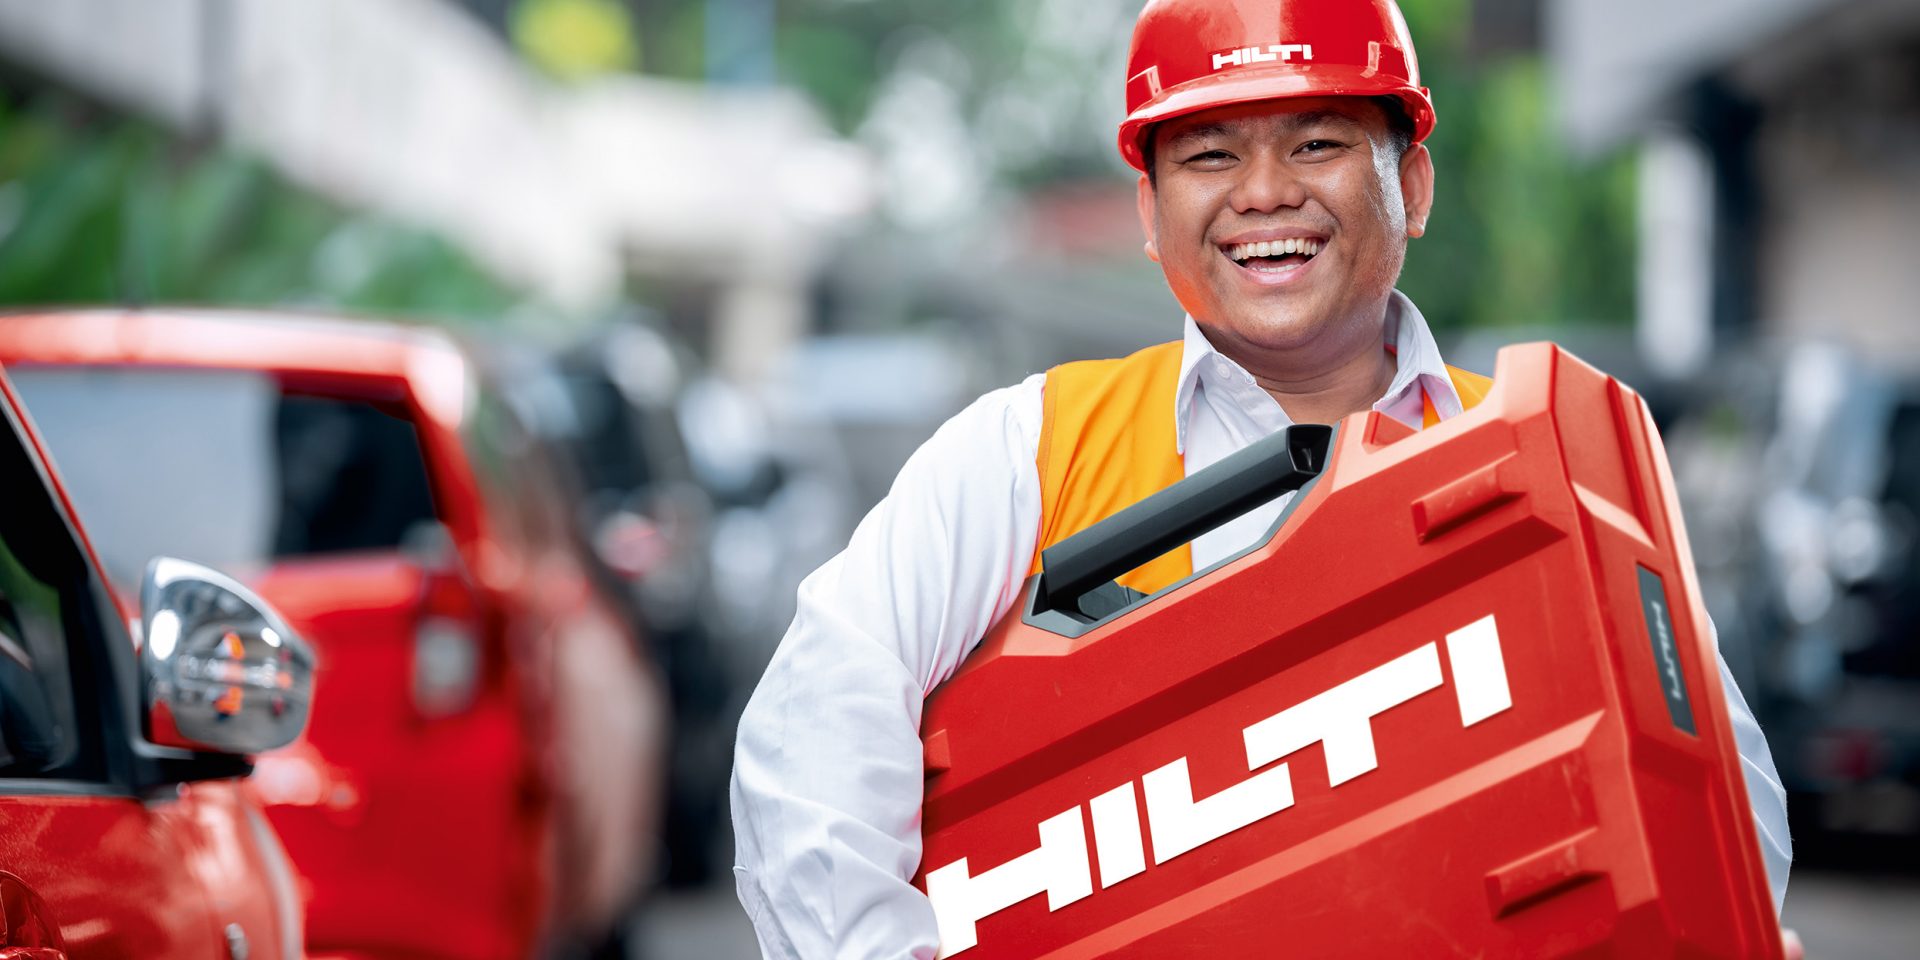 Hilti Group remains on course